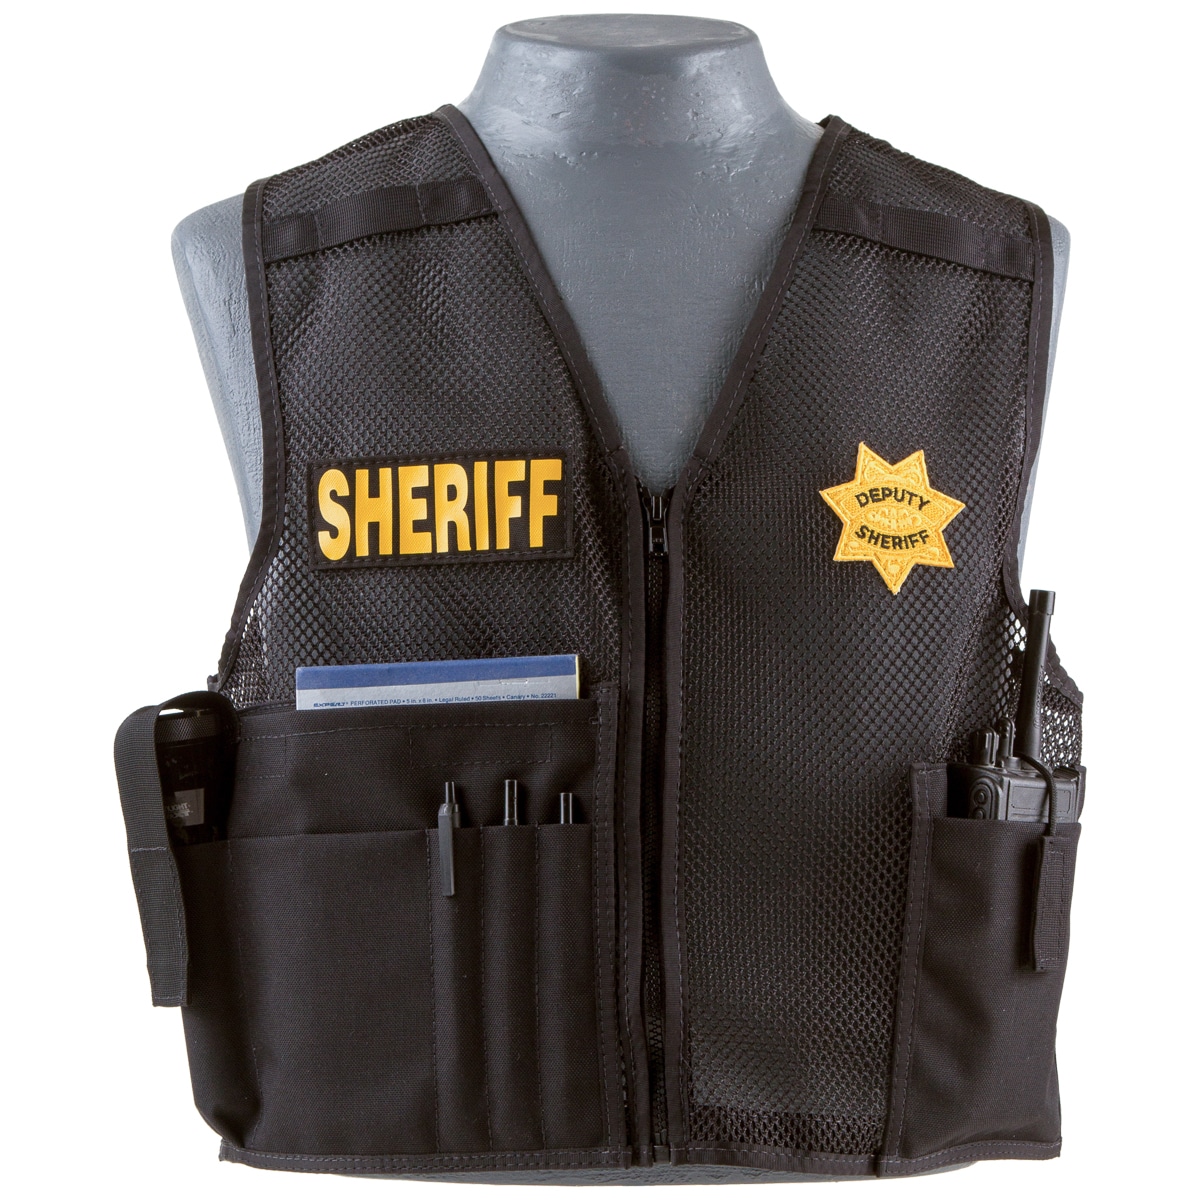 Identification Vest RC250 — Cowell Tactical - Bonners Ferry,